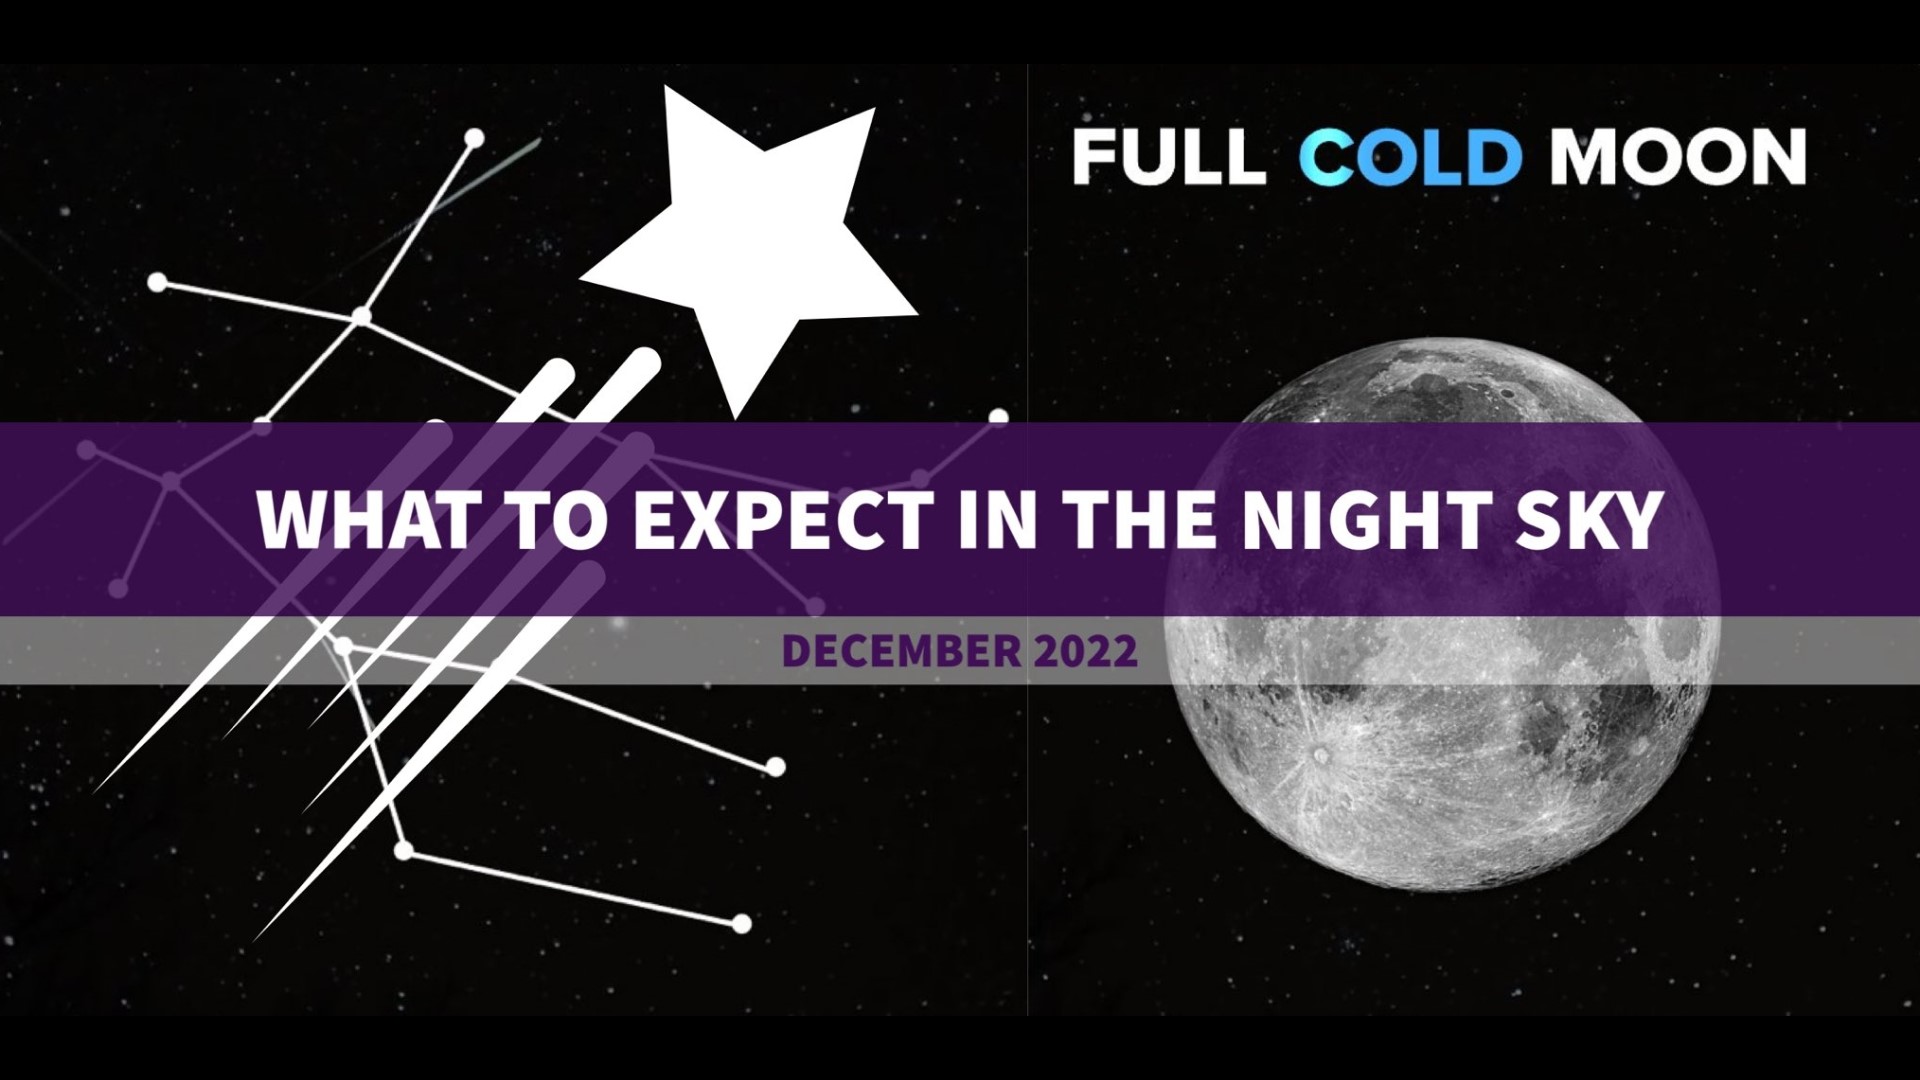 December is the darkest month of the year and brings the full cold moon and the Geminids meteor shower, one of the best ones of the year according to NASA.